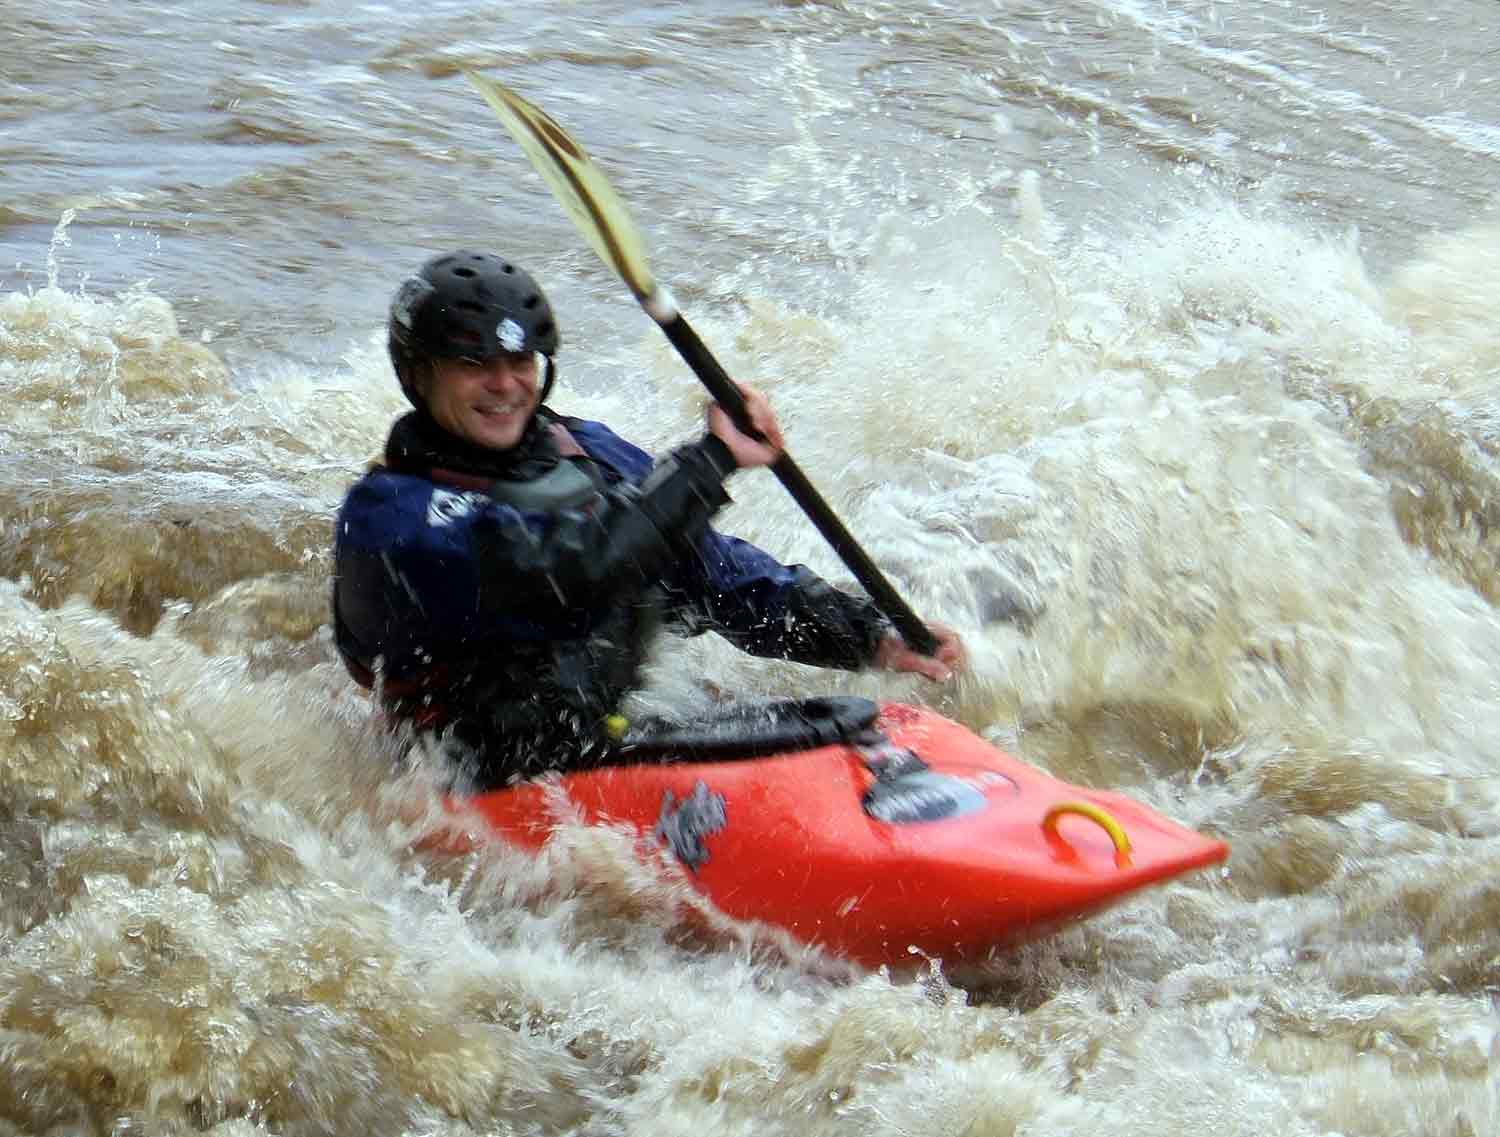 Kayaking, an exciting sport